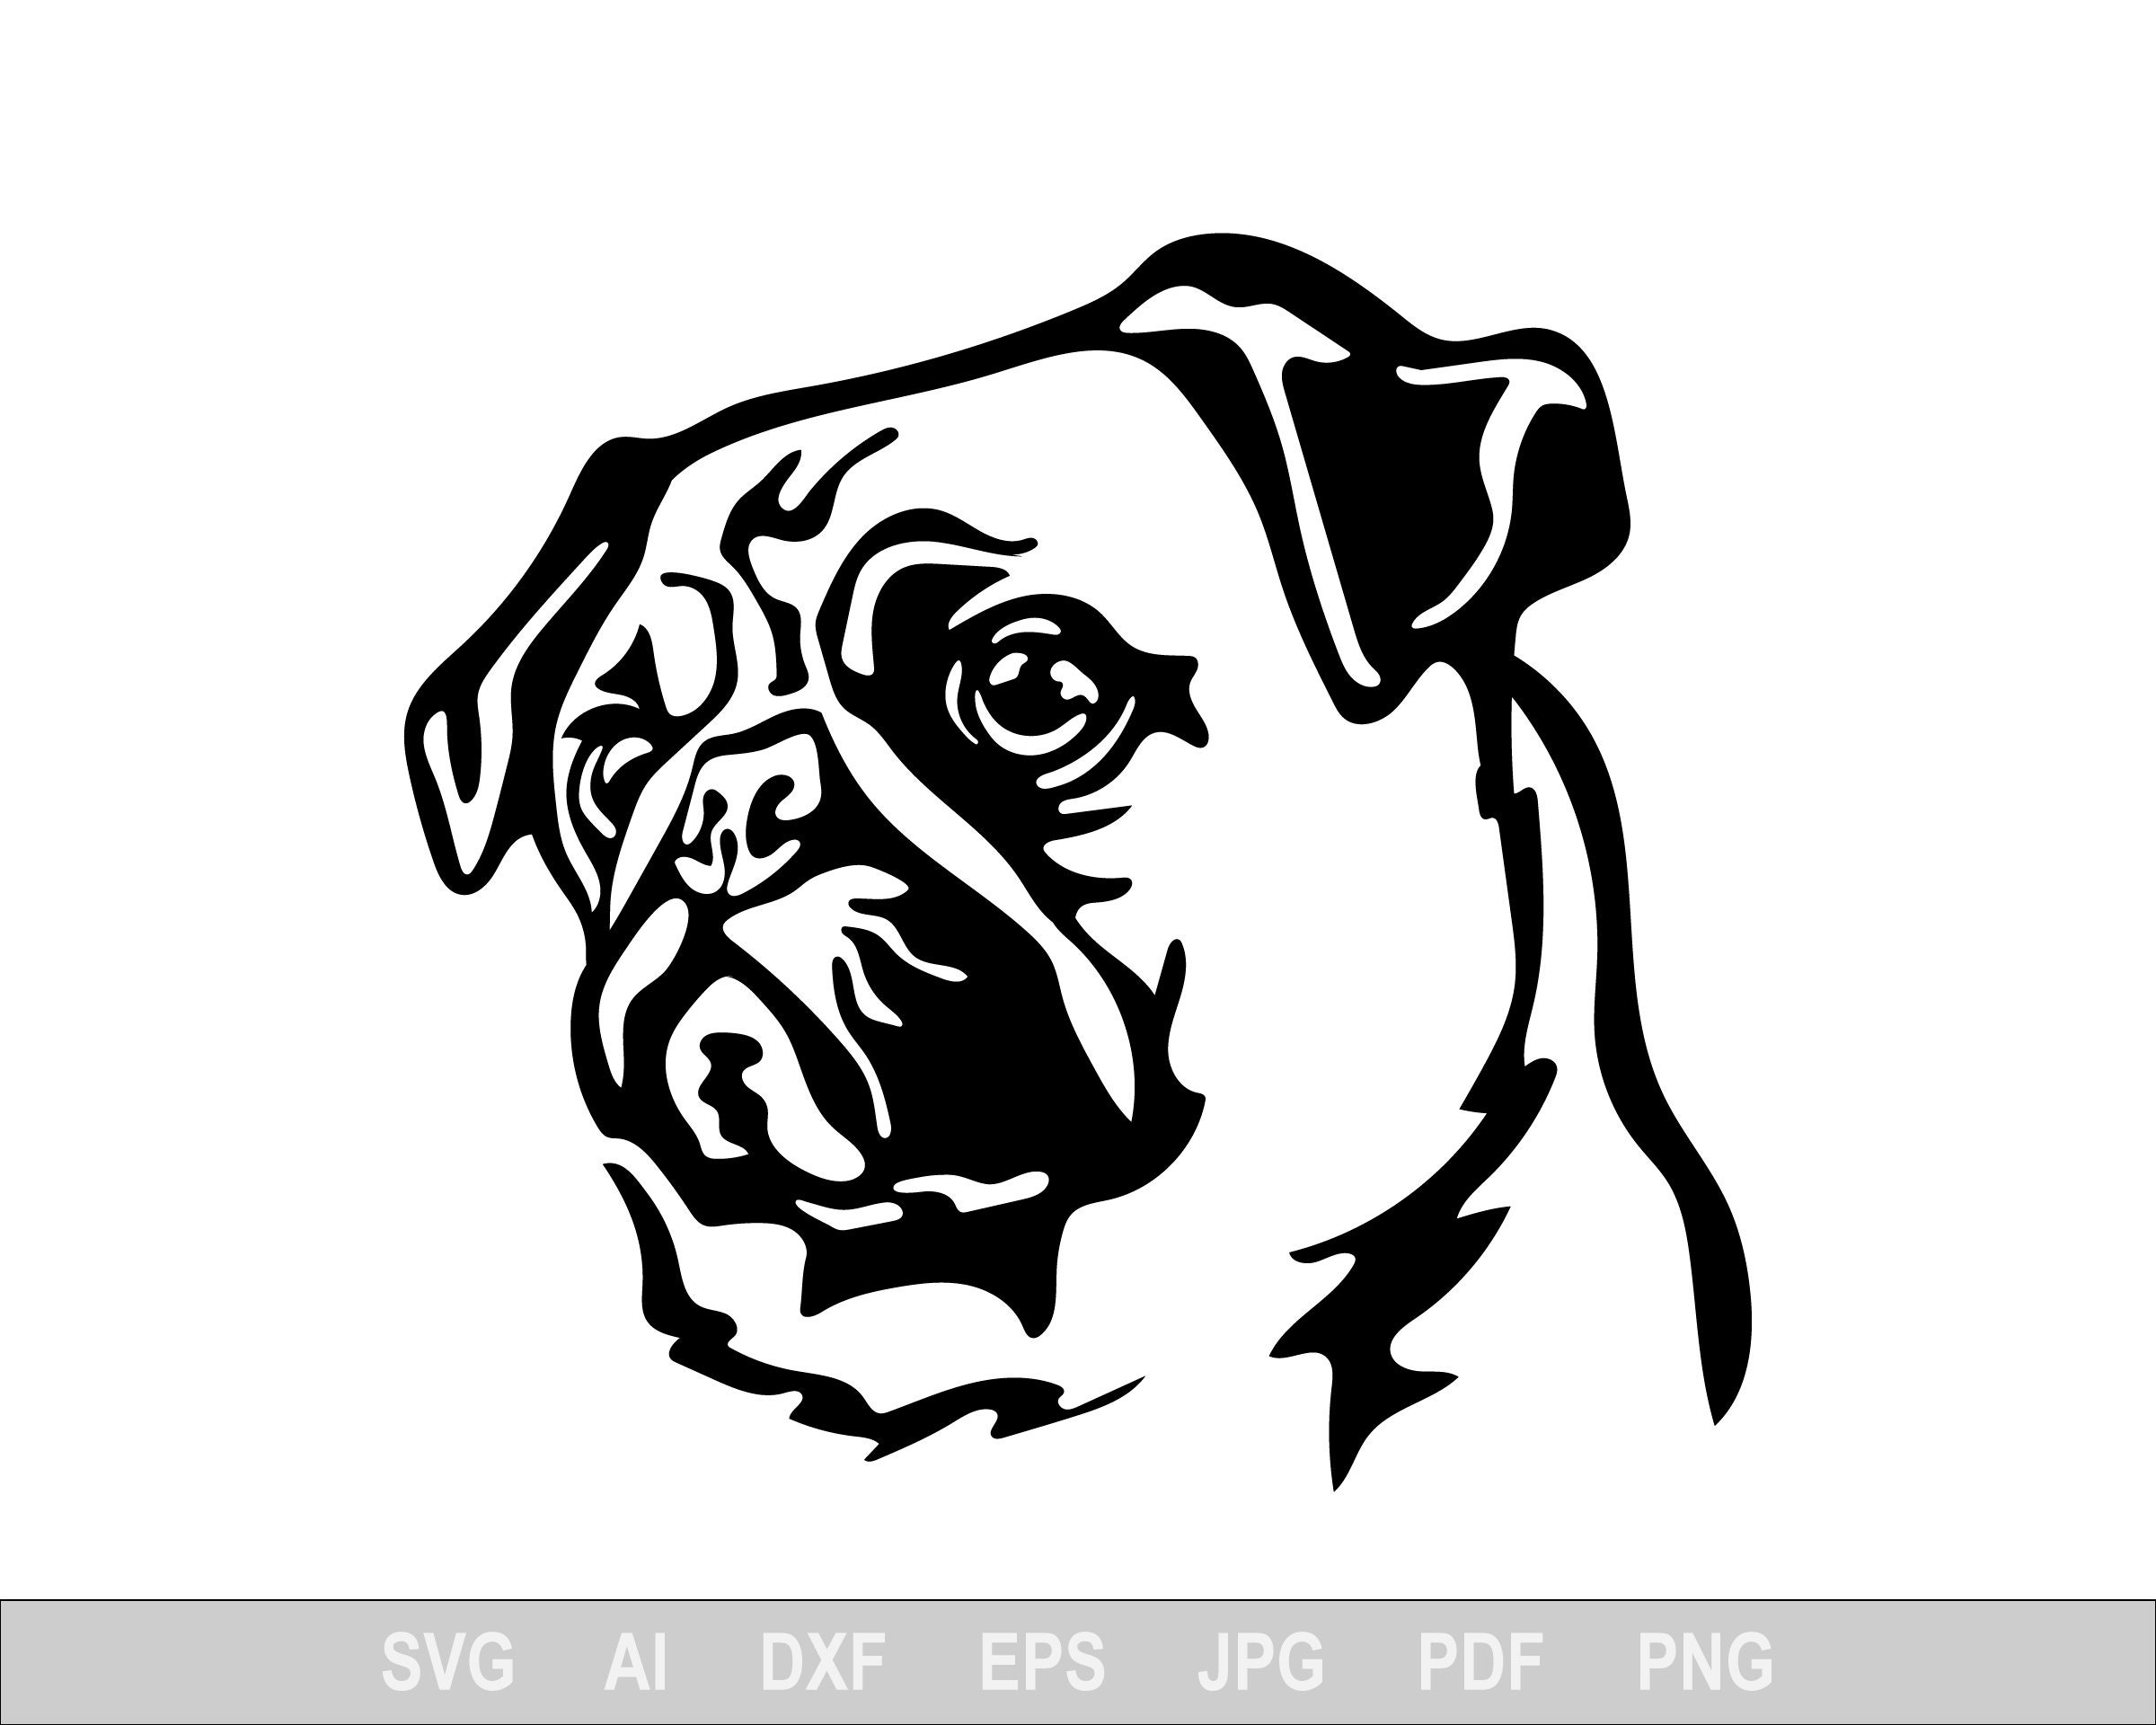 Pug Svg, Dog Svg Files for Cricut, Animal Dxf Cut File, Puppy Vector